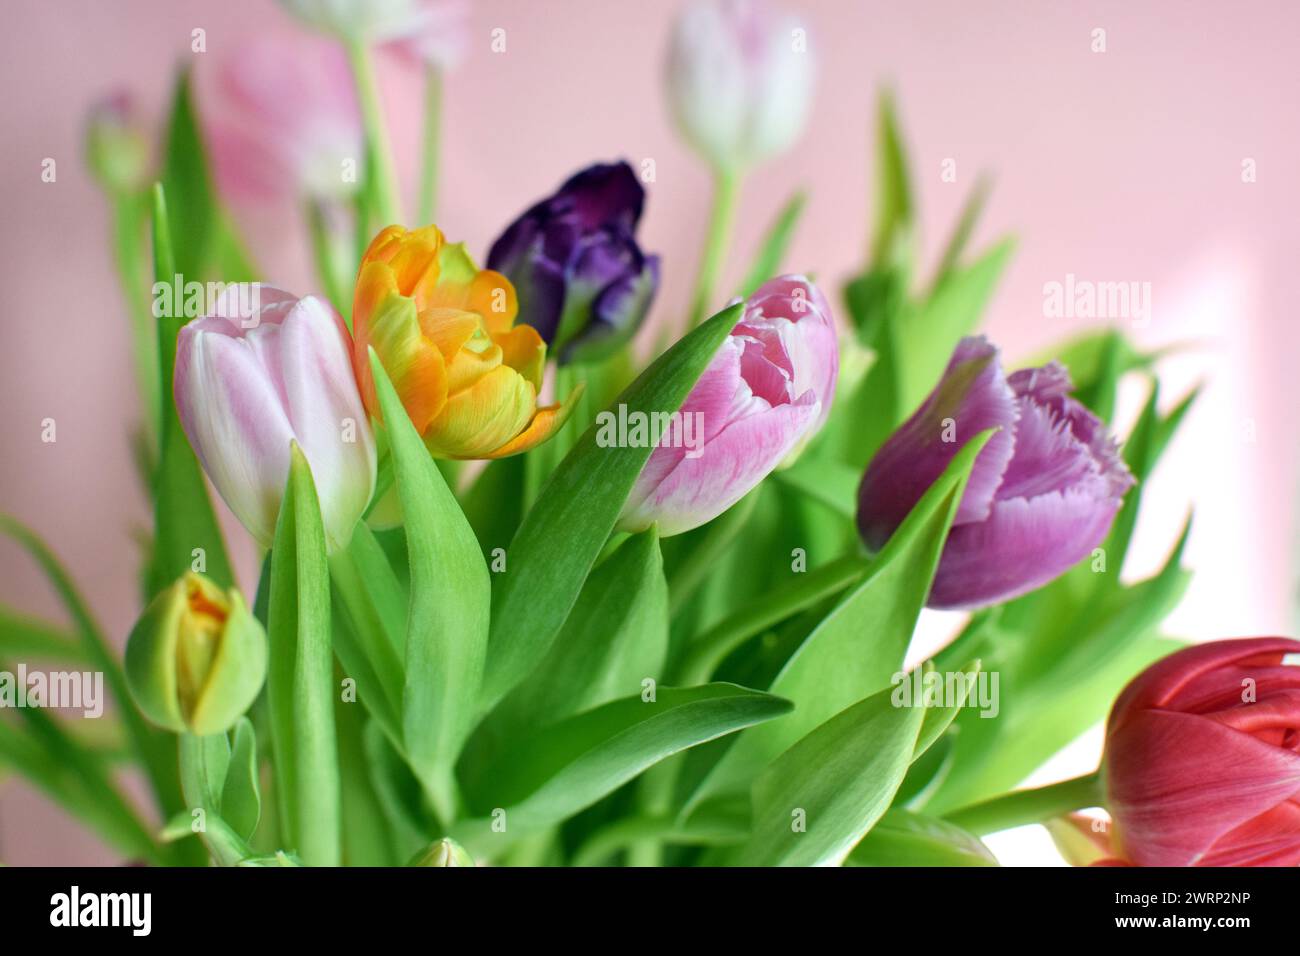 Bouquet of multi-colored tulips with green leaves. Stock Photo